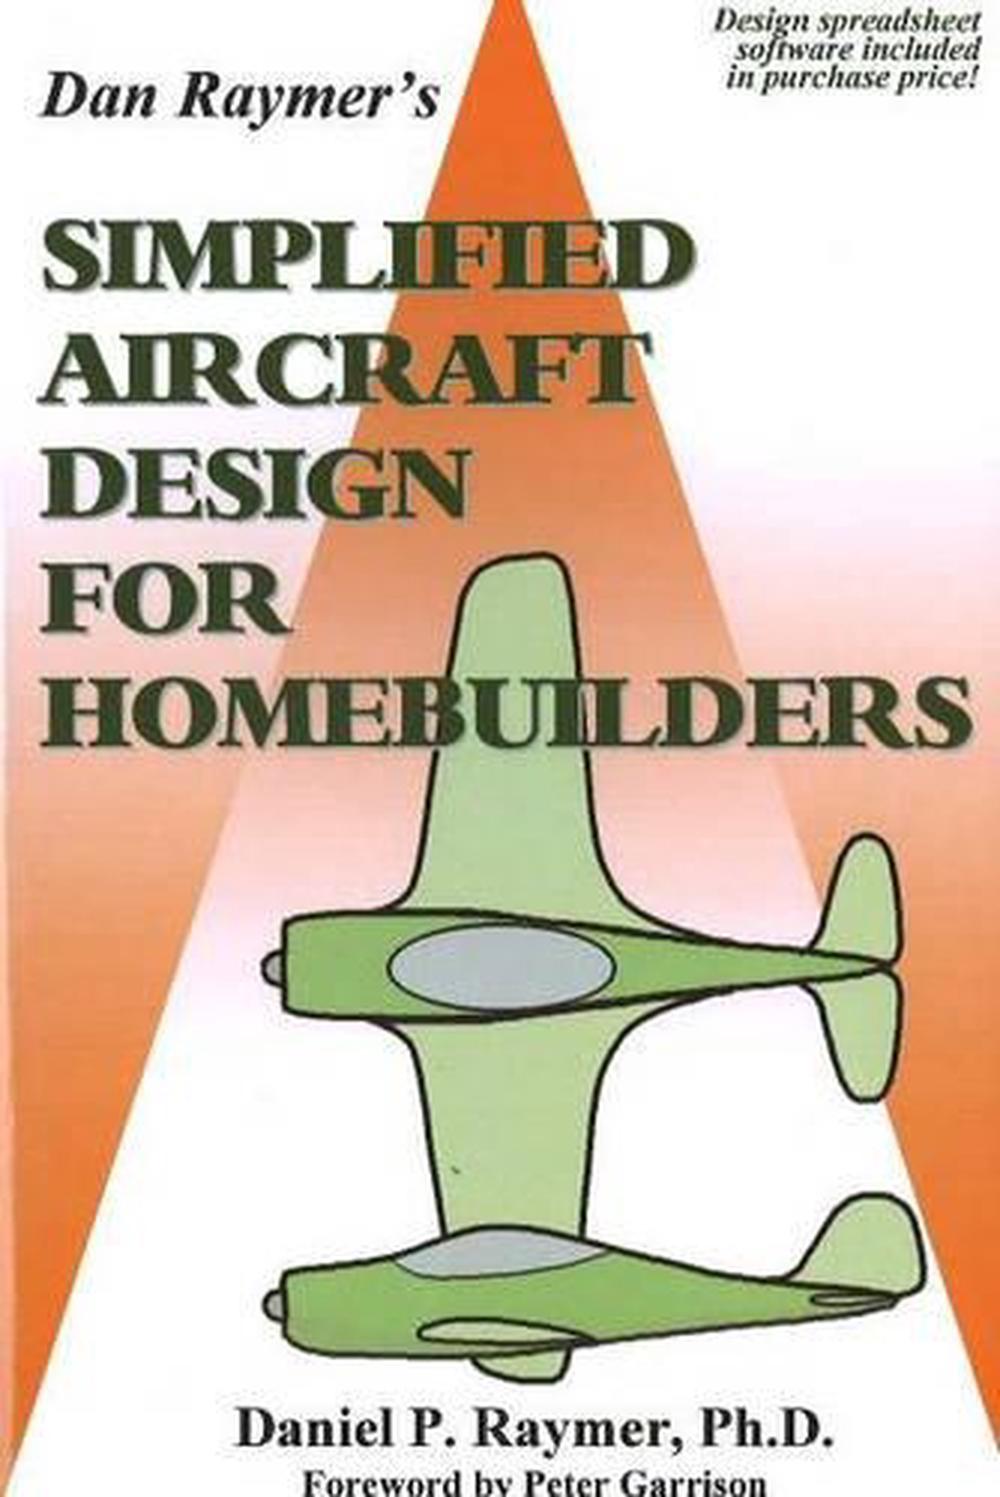 Simplified Aircraft Design for Homebuilders by Daniel Raymer (English